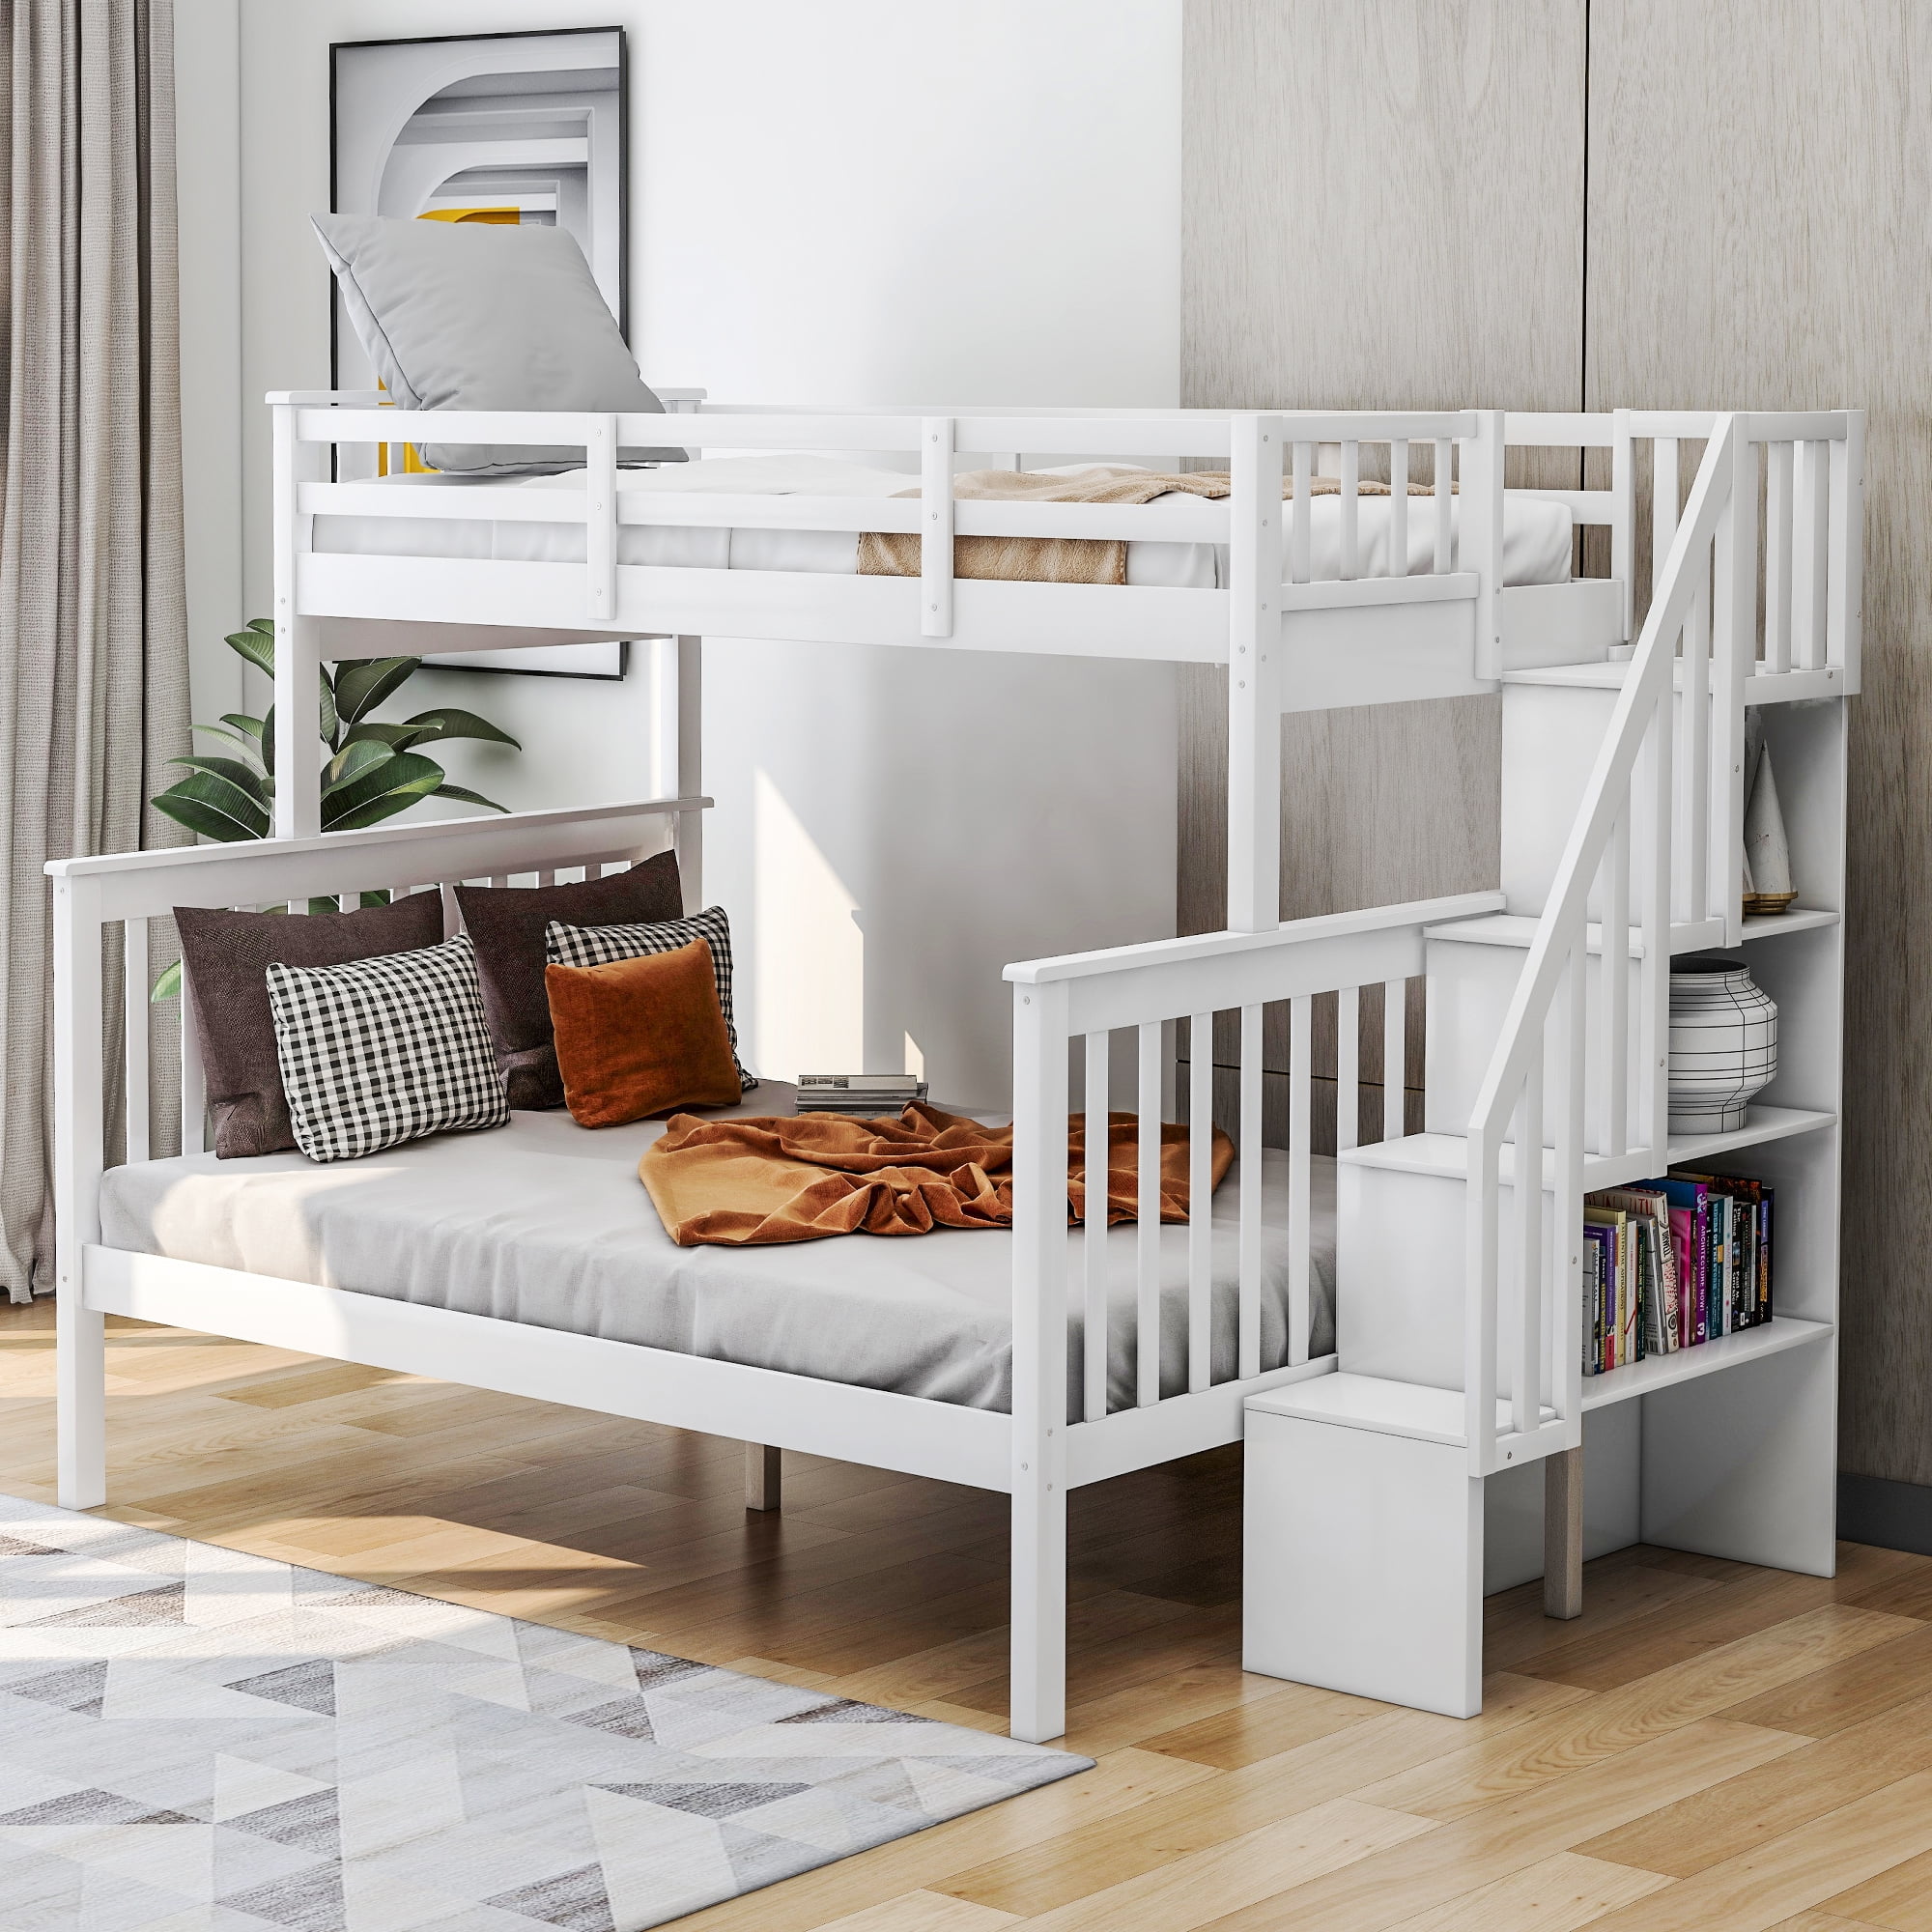 Twin Over Full Bunk Bed Frame Hardwood, Bunk Beds With 3rd Bed